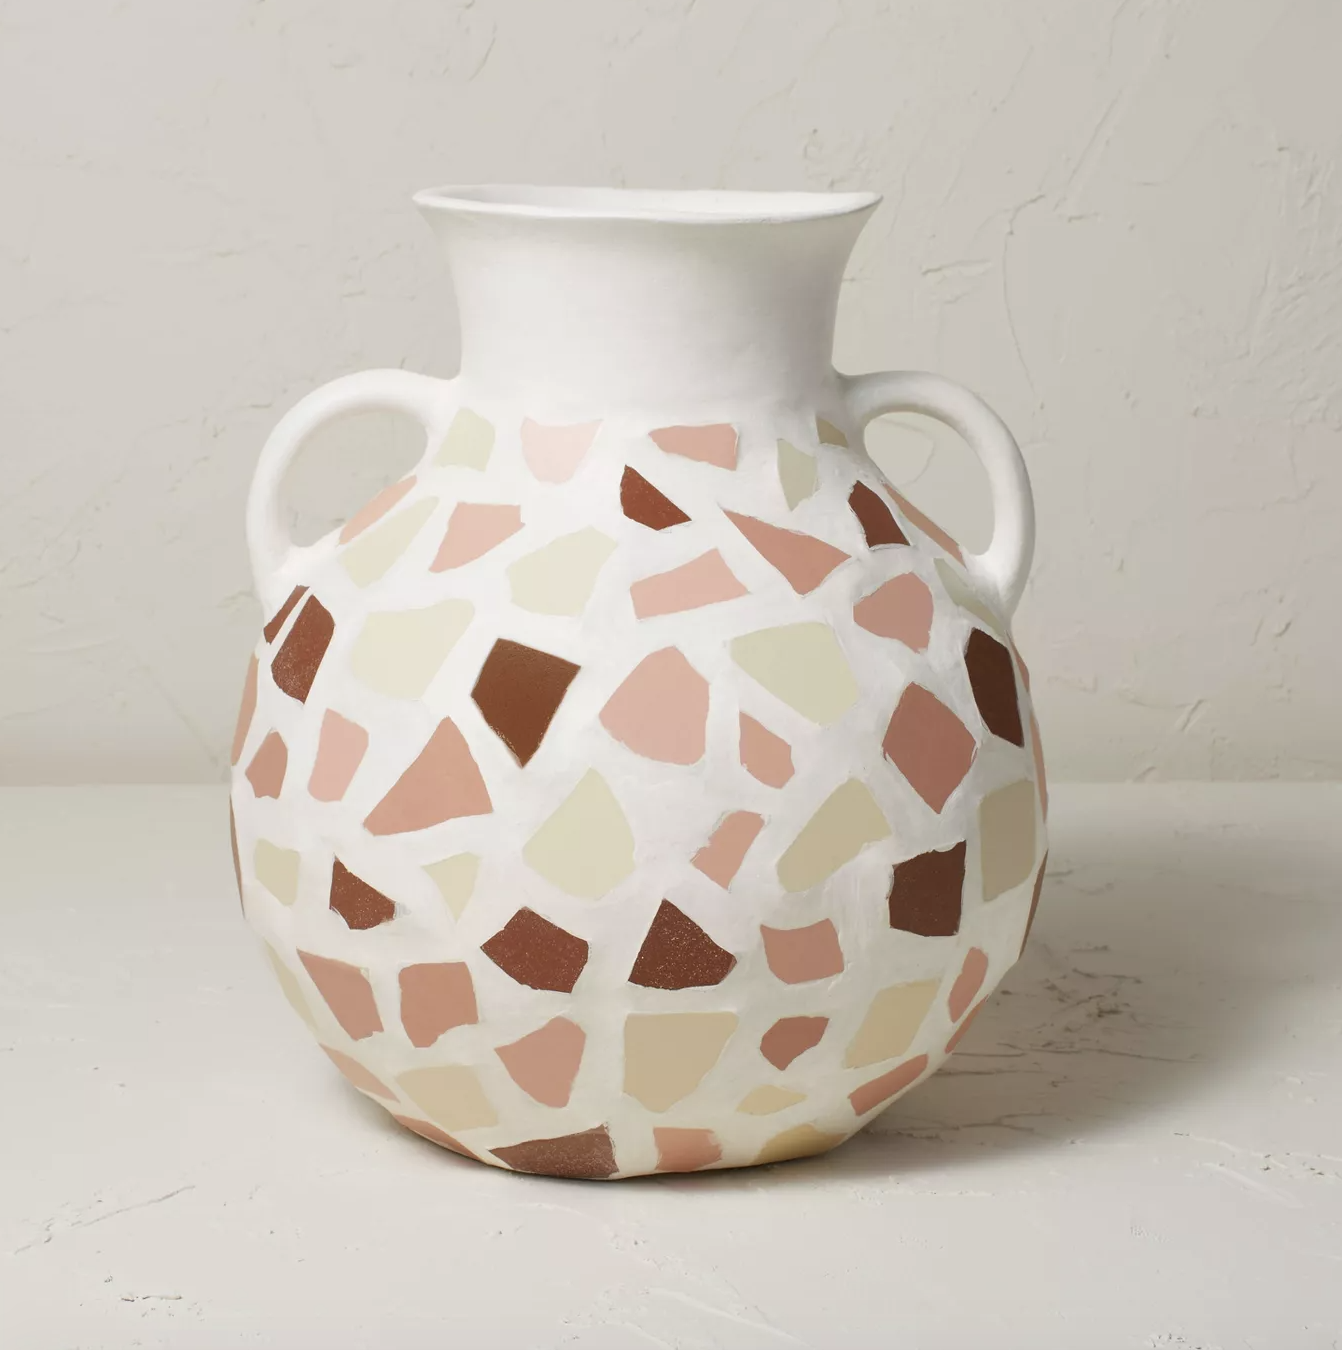 a white jug-shaped vase with pink, cream, and brown shapes on it